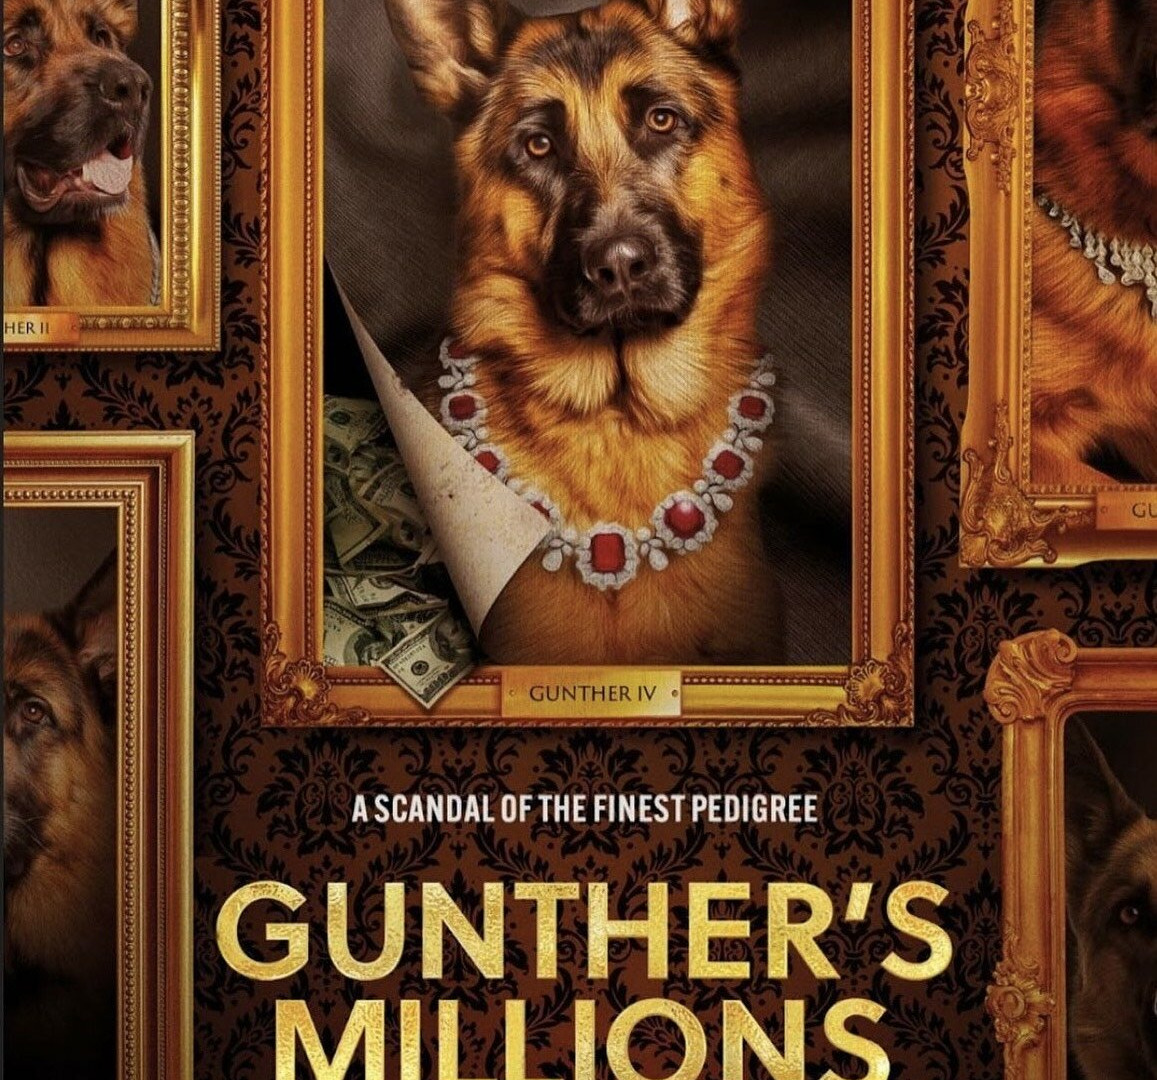 Show Gunther's Millions